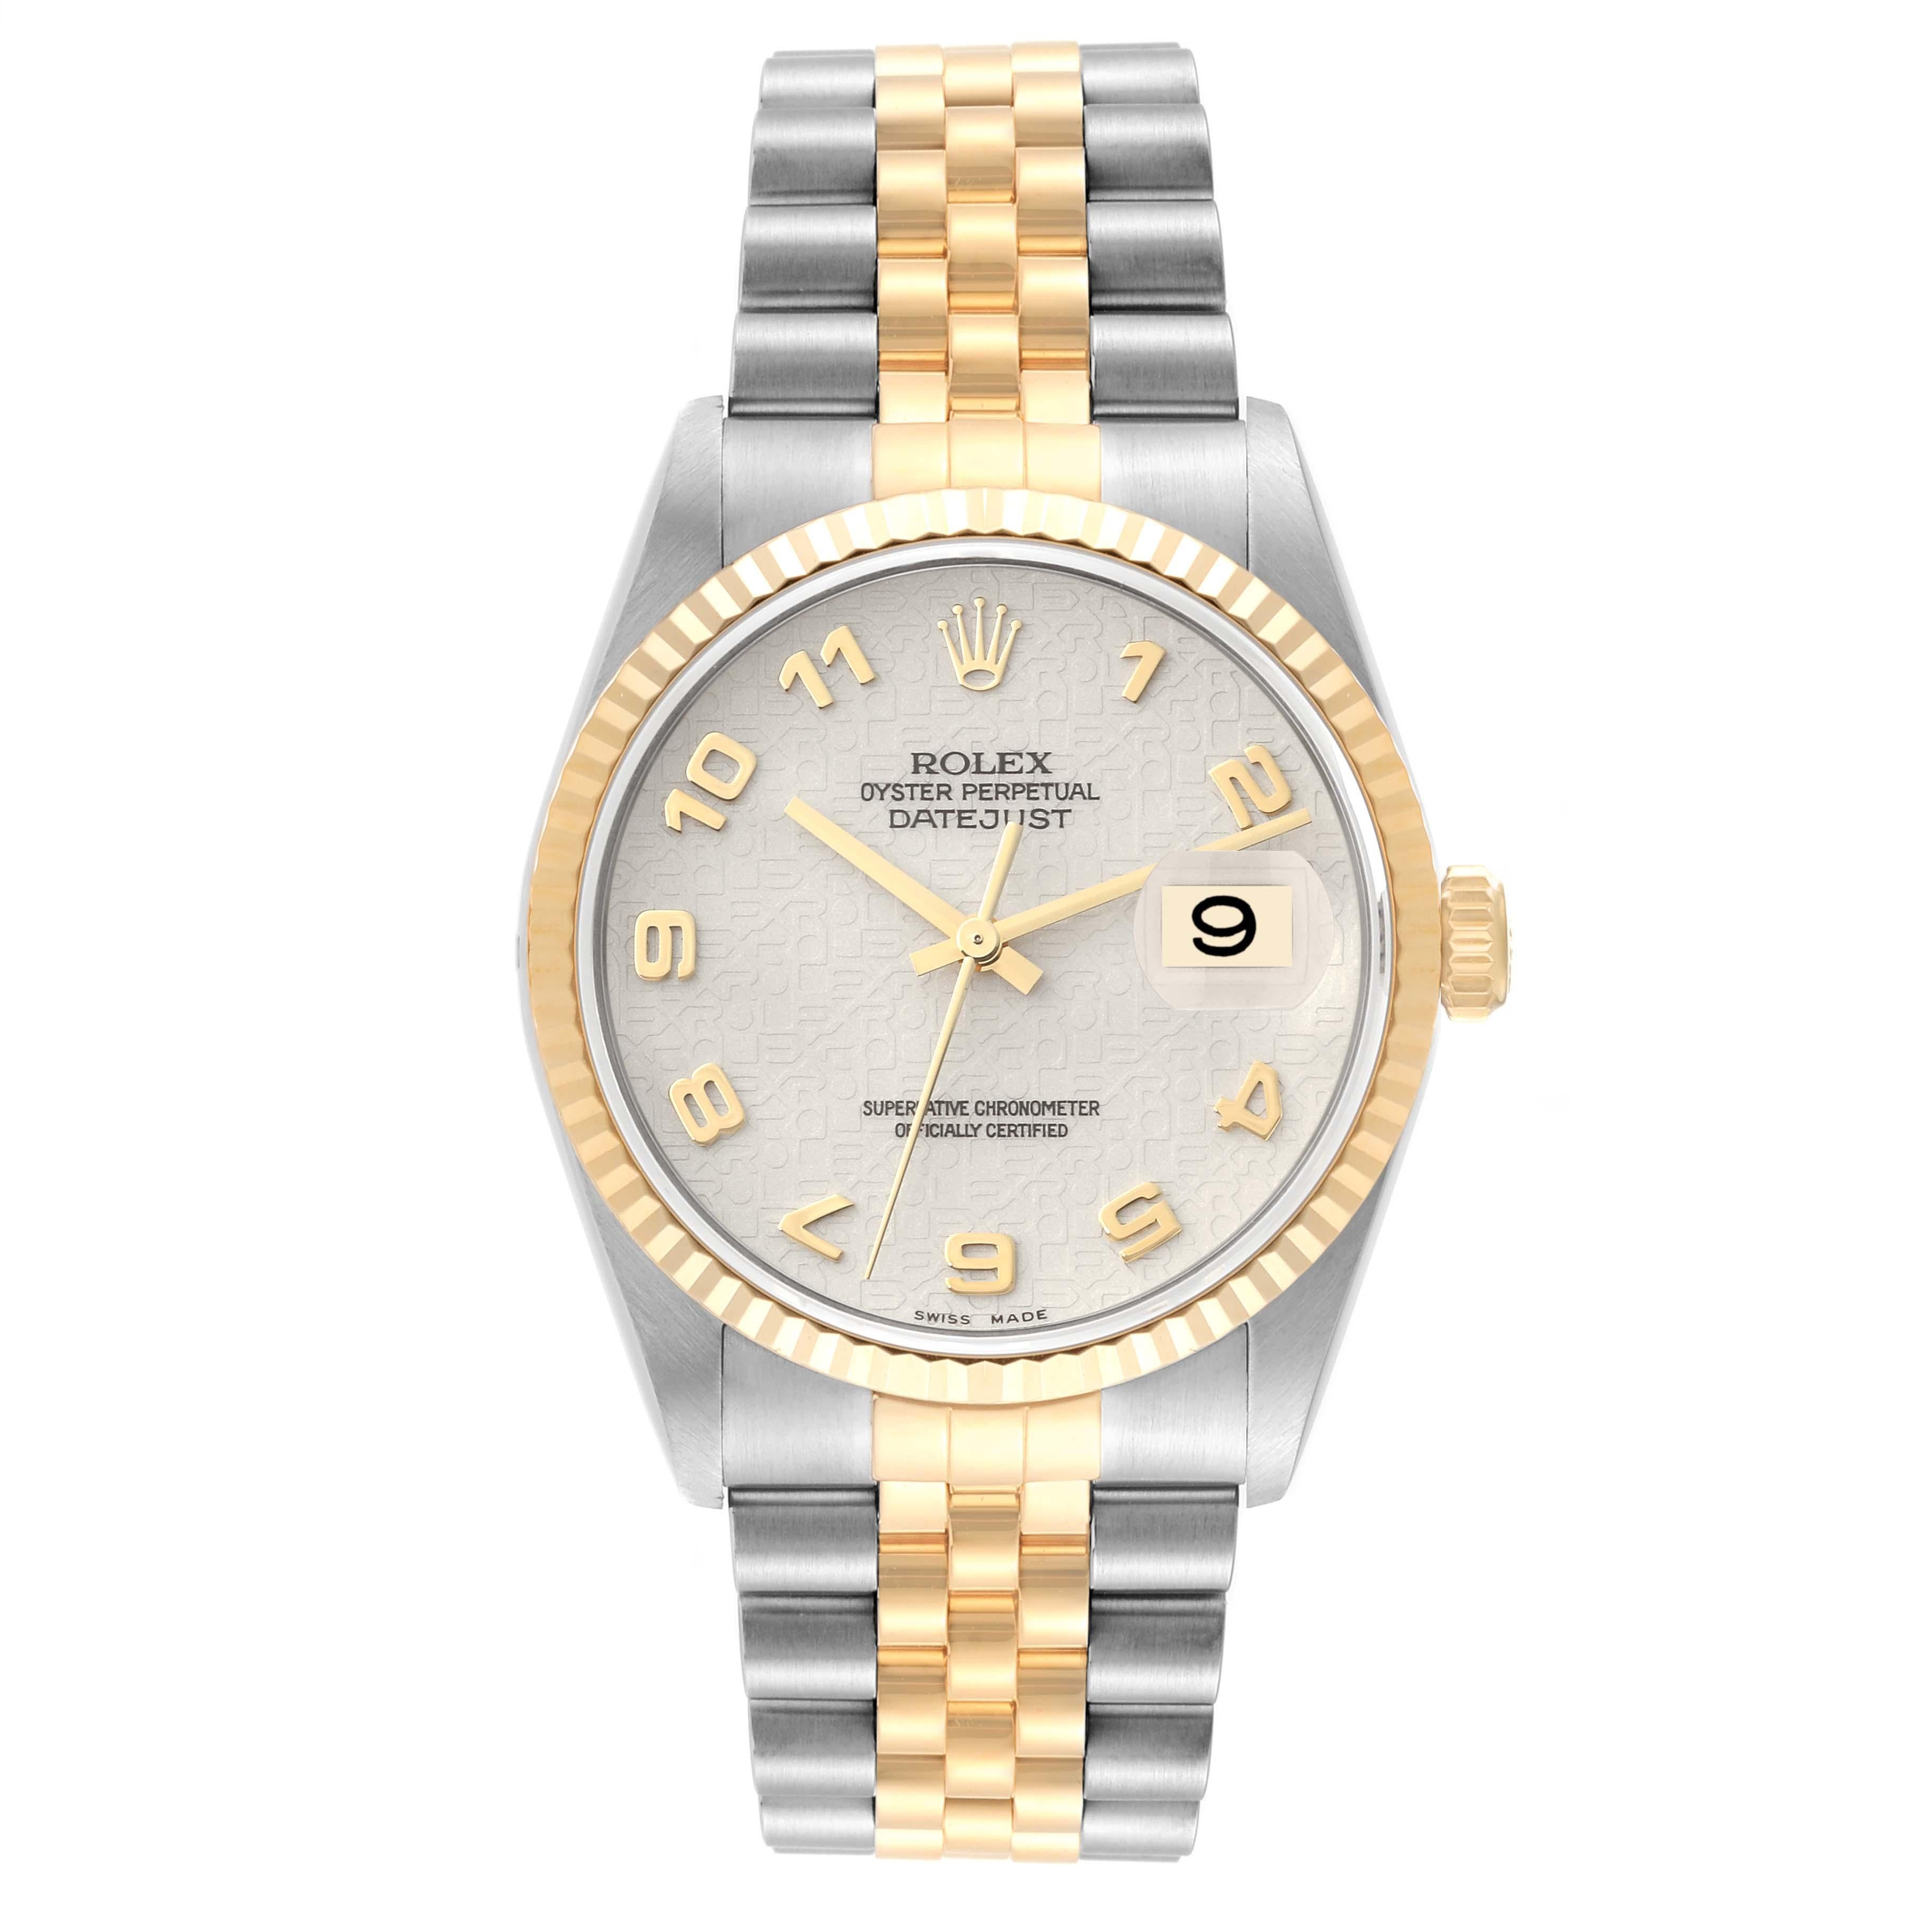 Rolex Datejust Steel Yellow Gold Ivory Anniversary Dial Mens Watch 16233. Officially certified chronometer automatic self-winding movement. Stainless steel case 36 mm in diameter.  Rolex logo on an 18K yellow gold crown. 18k yellow gold fluted